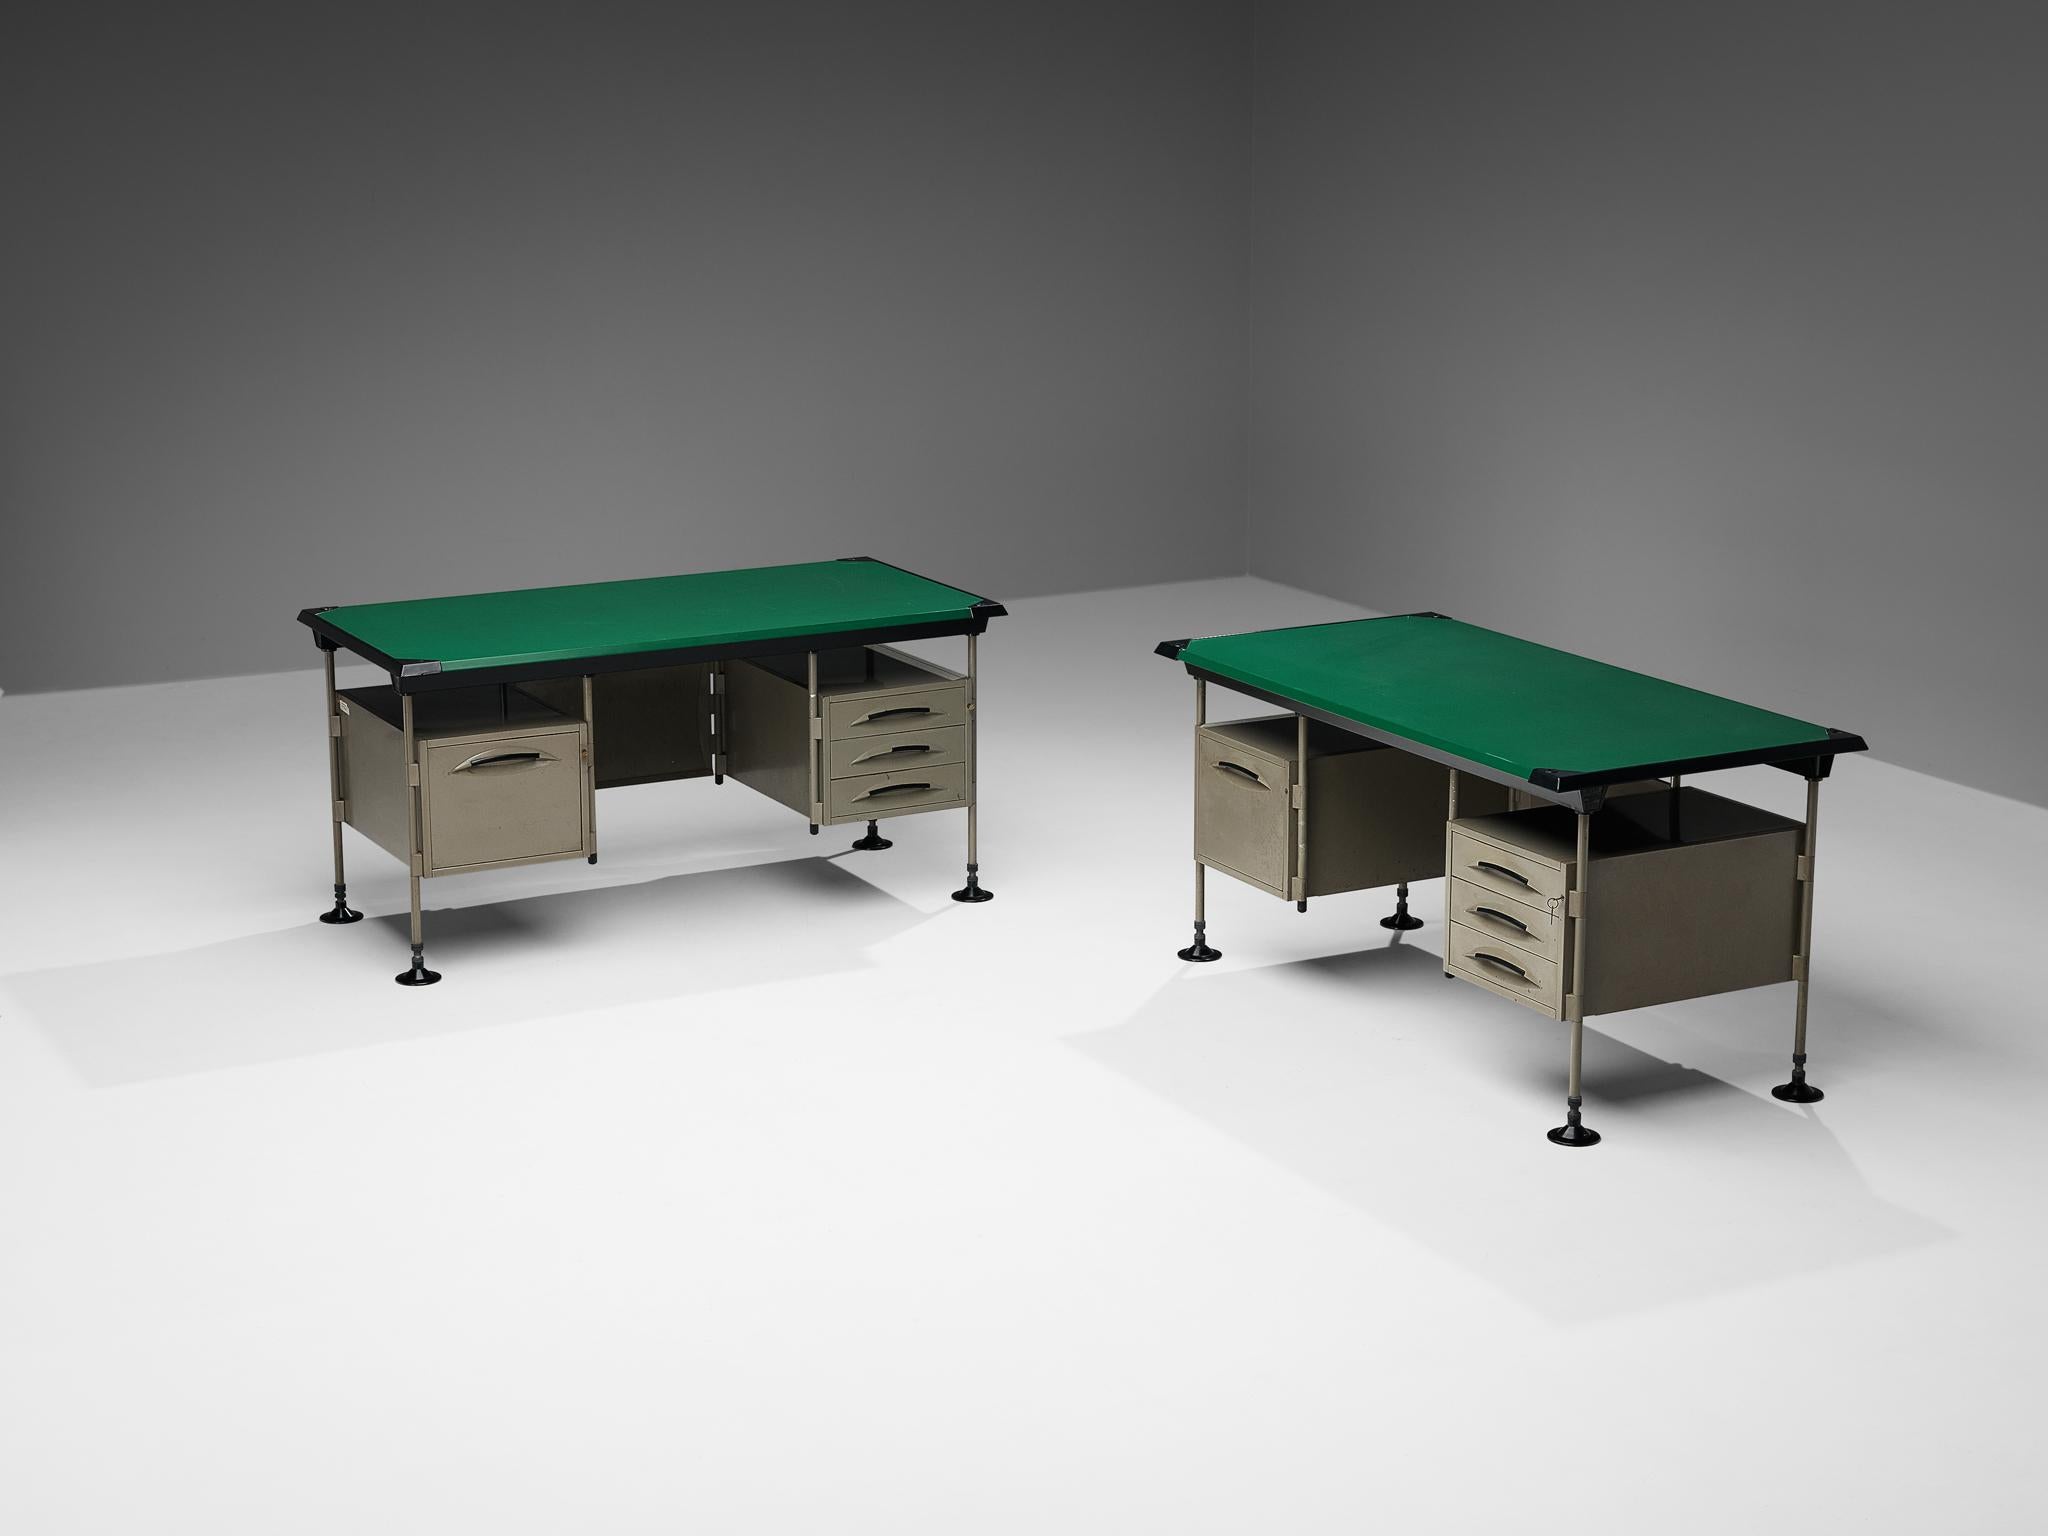 Studio BBPR for Olivetti, 'Spazio' writing desks, coated steel, plastic, vinyl, Italy, design 1959/60, production 1960s 

In 1954, Olivetti, the Italian office equipment manufacturer, hired BBPR to design their New York showroom on Fifth Avenue